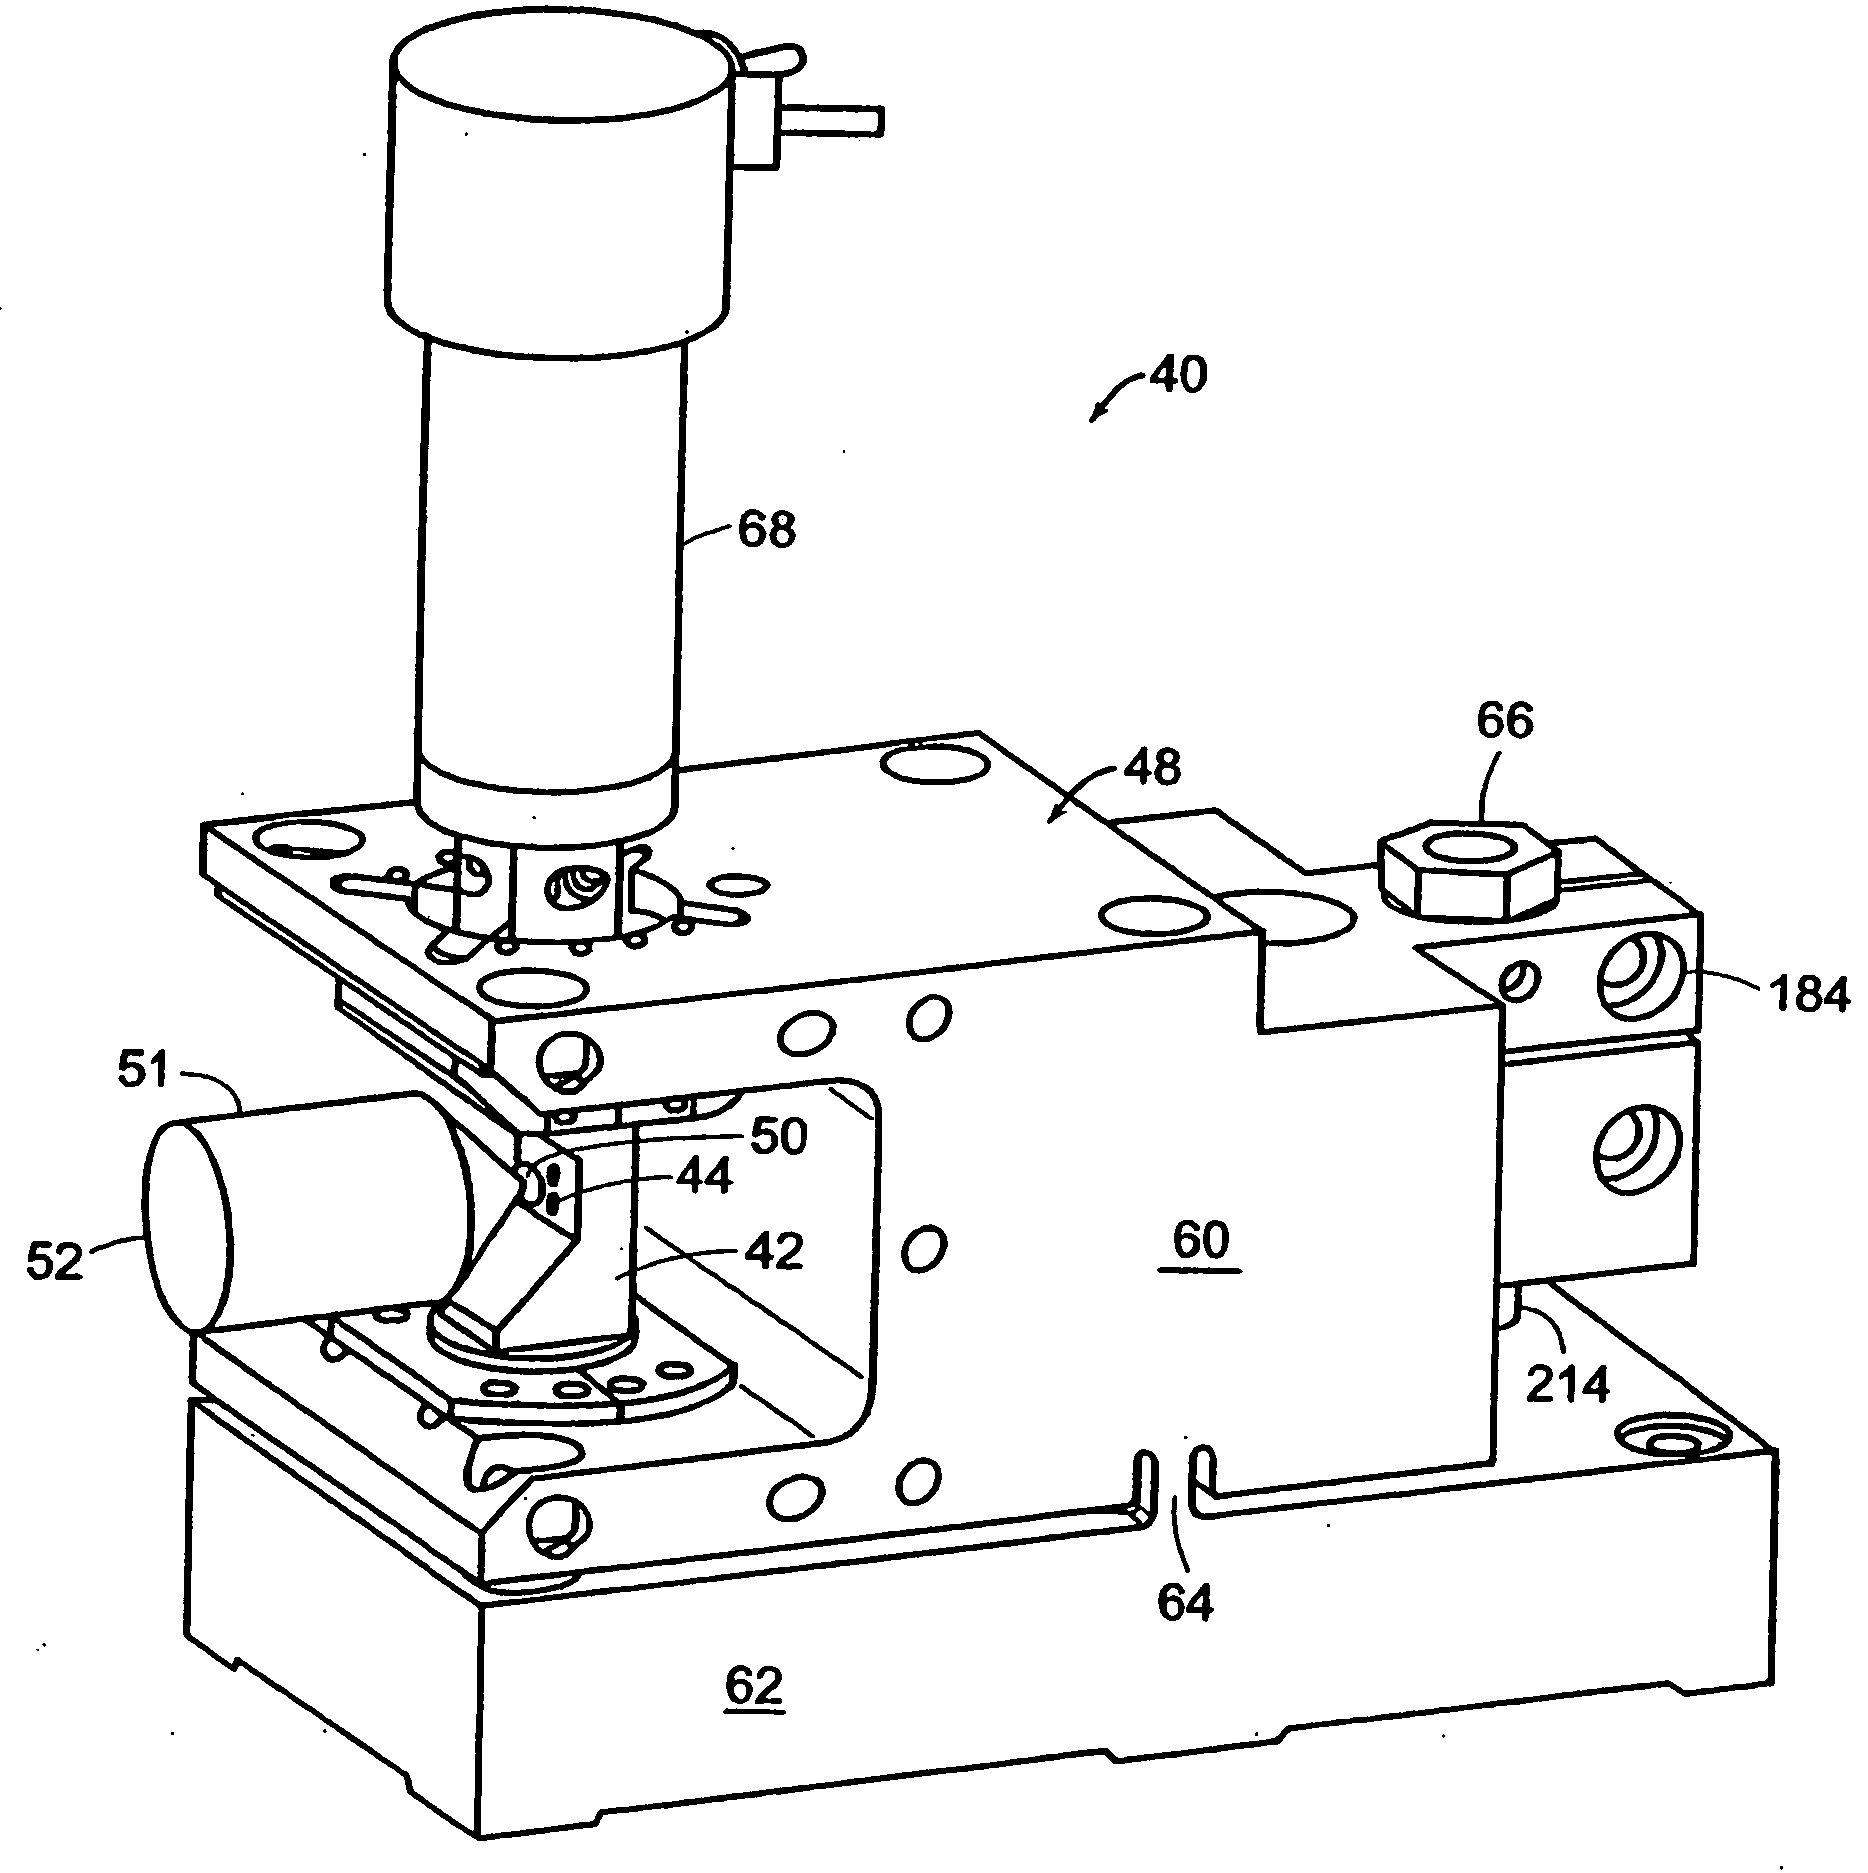 Flux-biased electromagnetic fast tool servo systems and methods